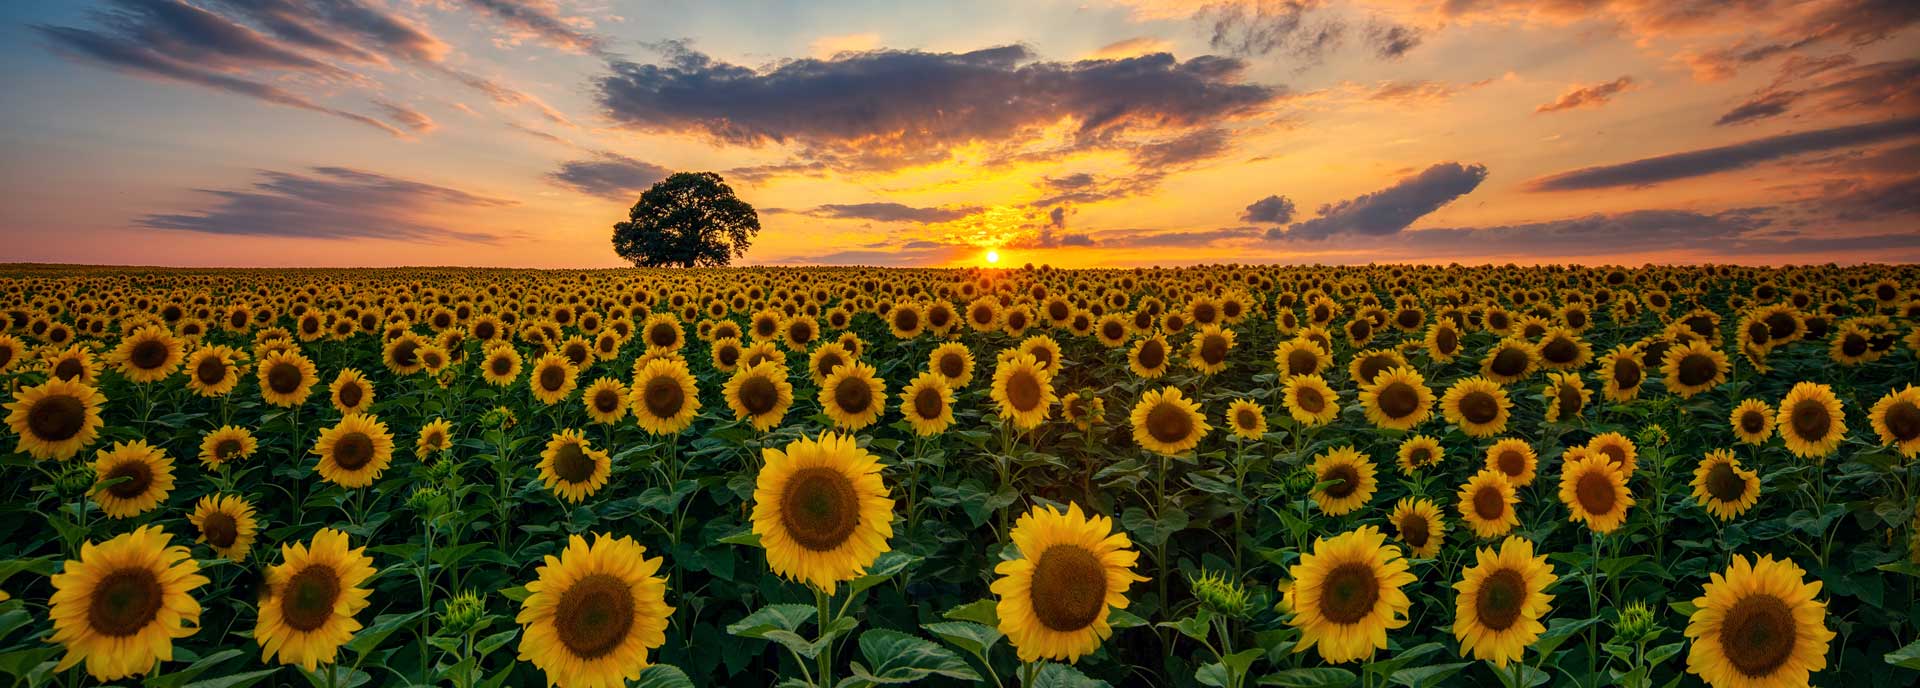 Field of sun flowers with sunset in the background.